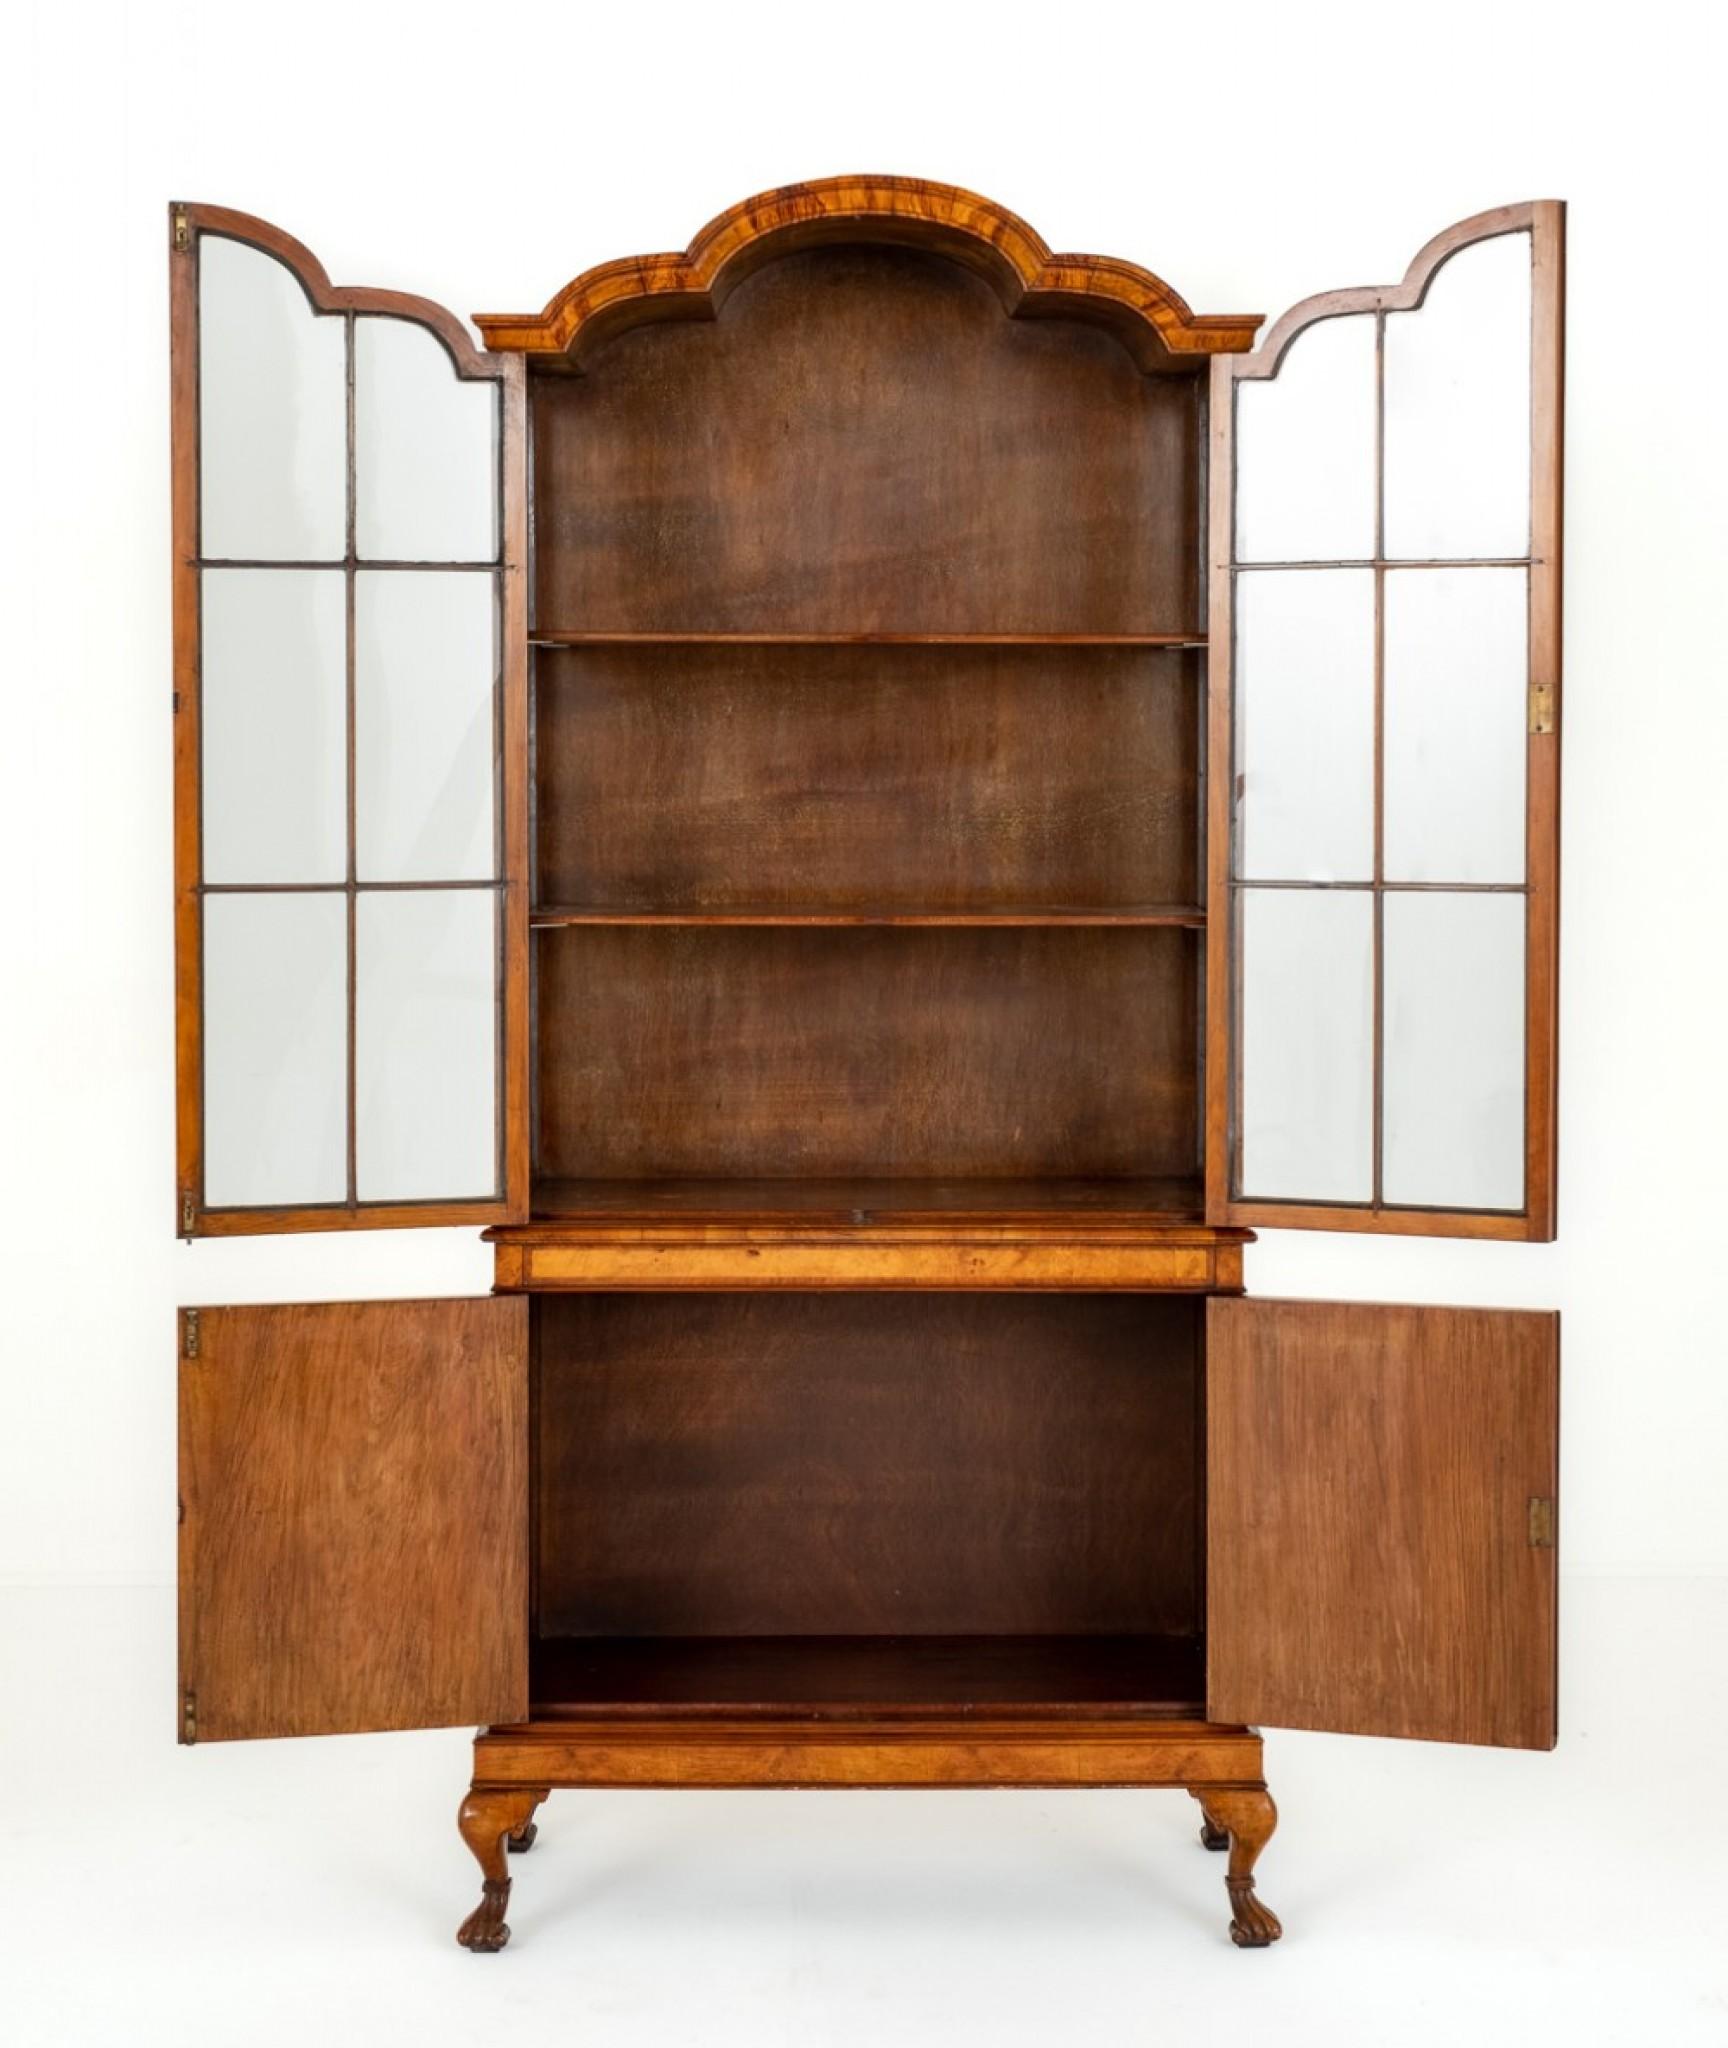 Walnut Queen Anne Style Display Cabinet.
This Cabinet Stands Upon Cabriole Legs With Carved Feet.
Circa 1920
The 2 Lower Doors Featuring Book Matched Burr Walnut Veneers and Cross-banding
The Upper Section Having 2 Glazed Doors With a Shaped